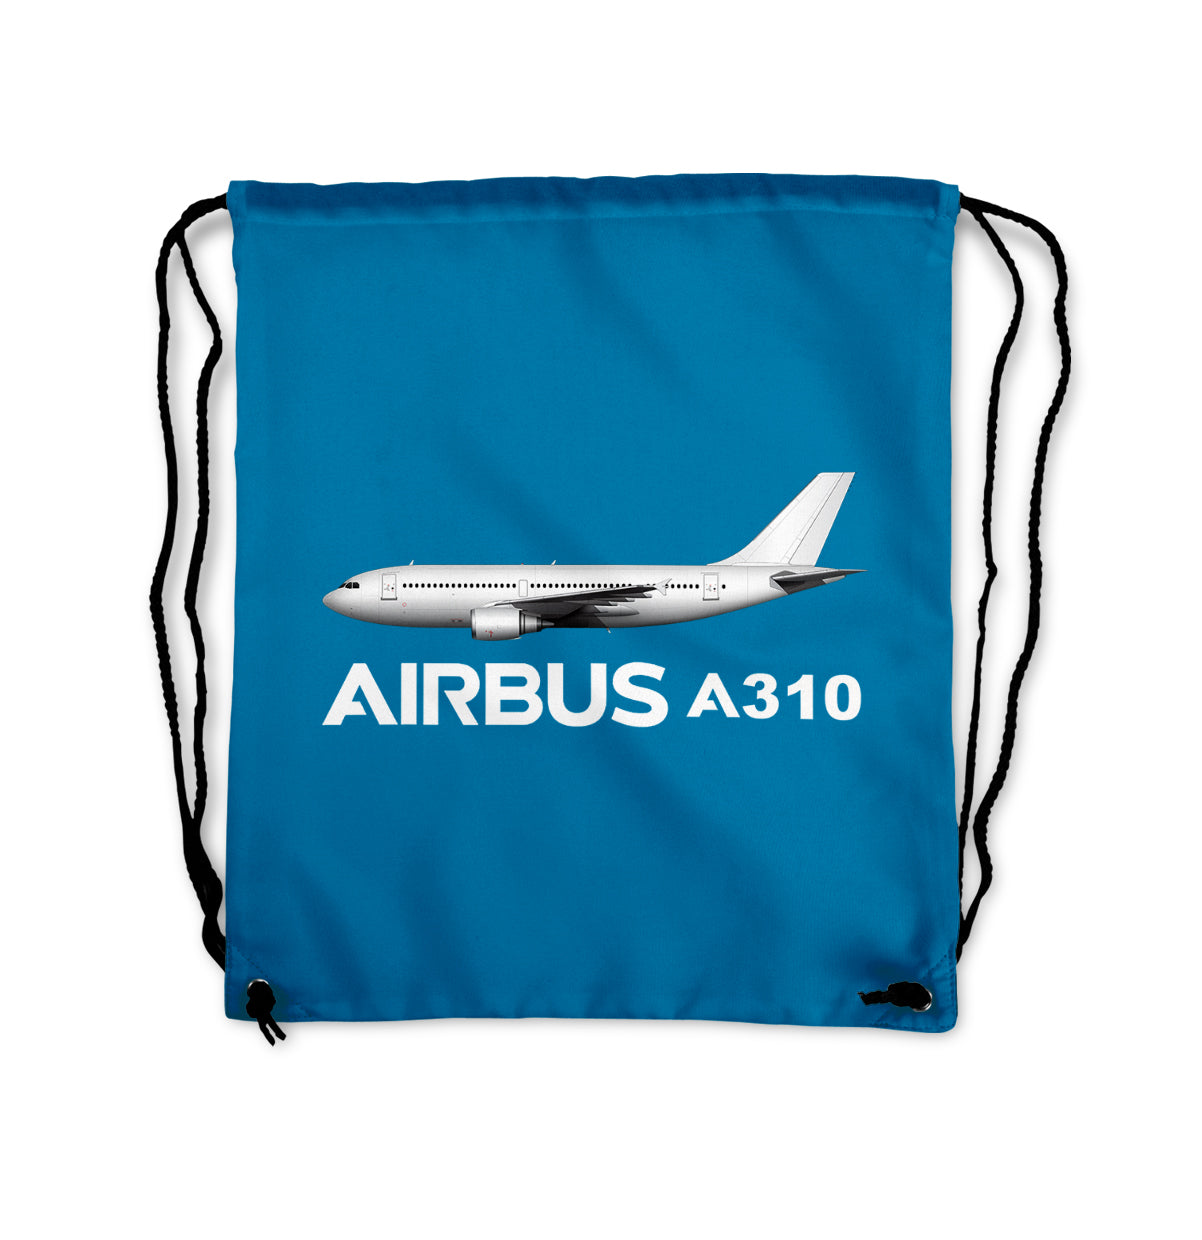 The Airbus A310 Designed Drawstring Bags